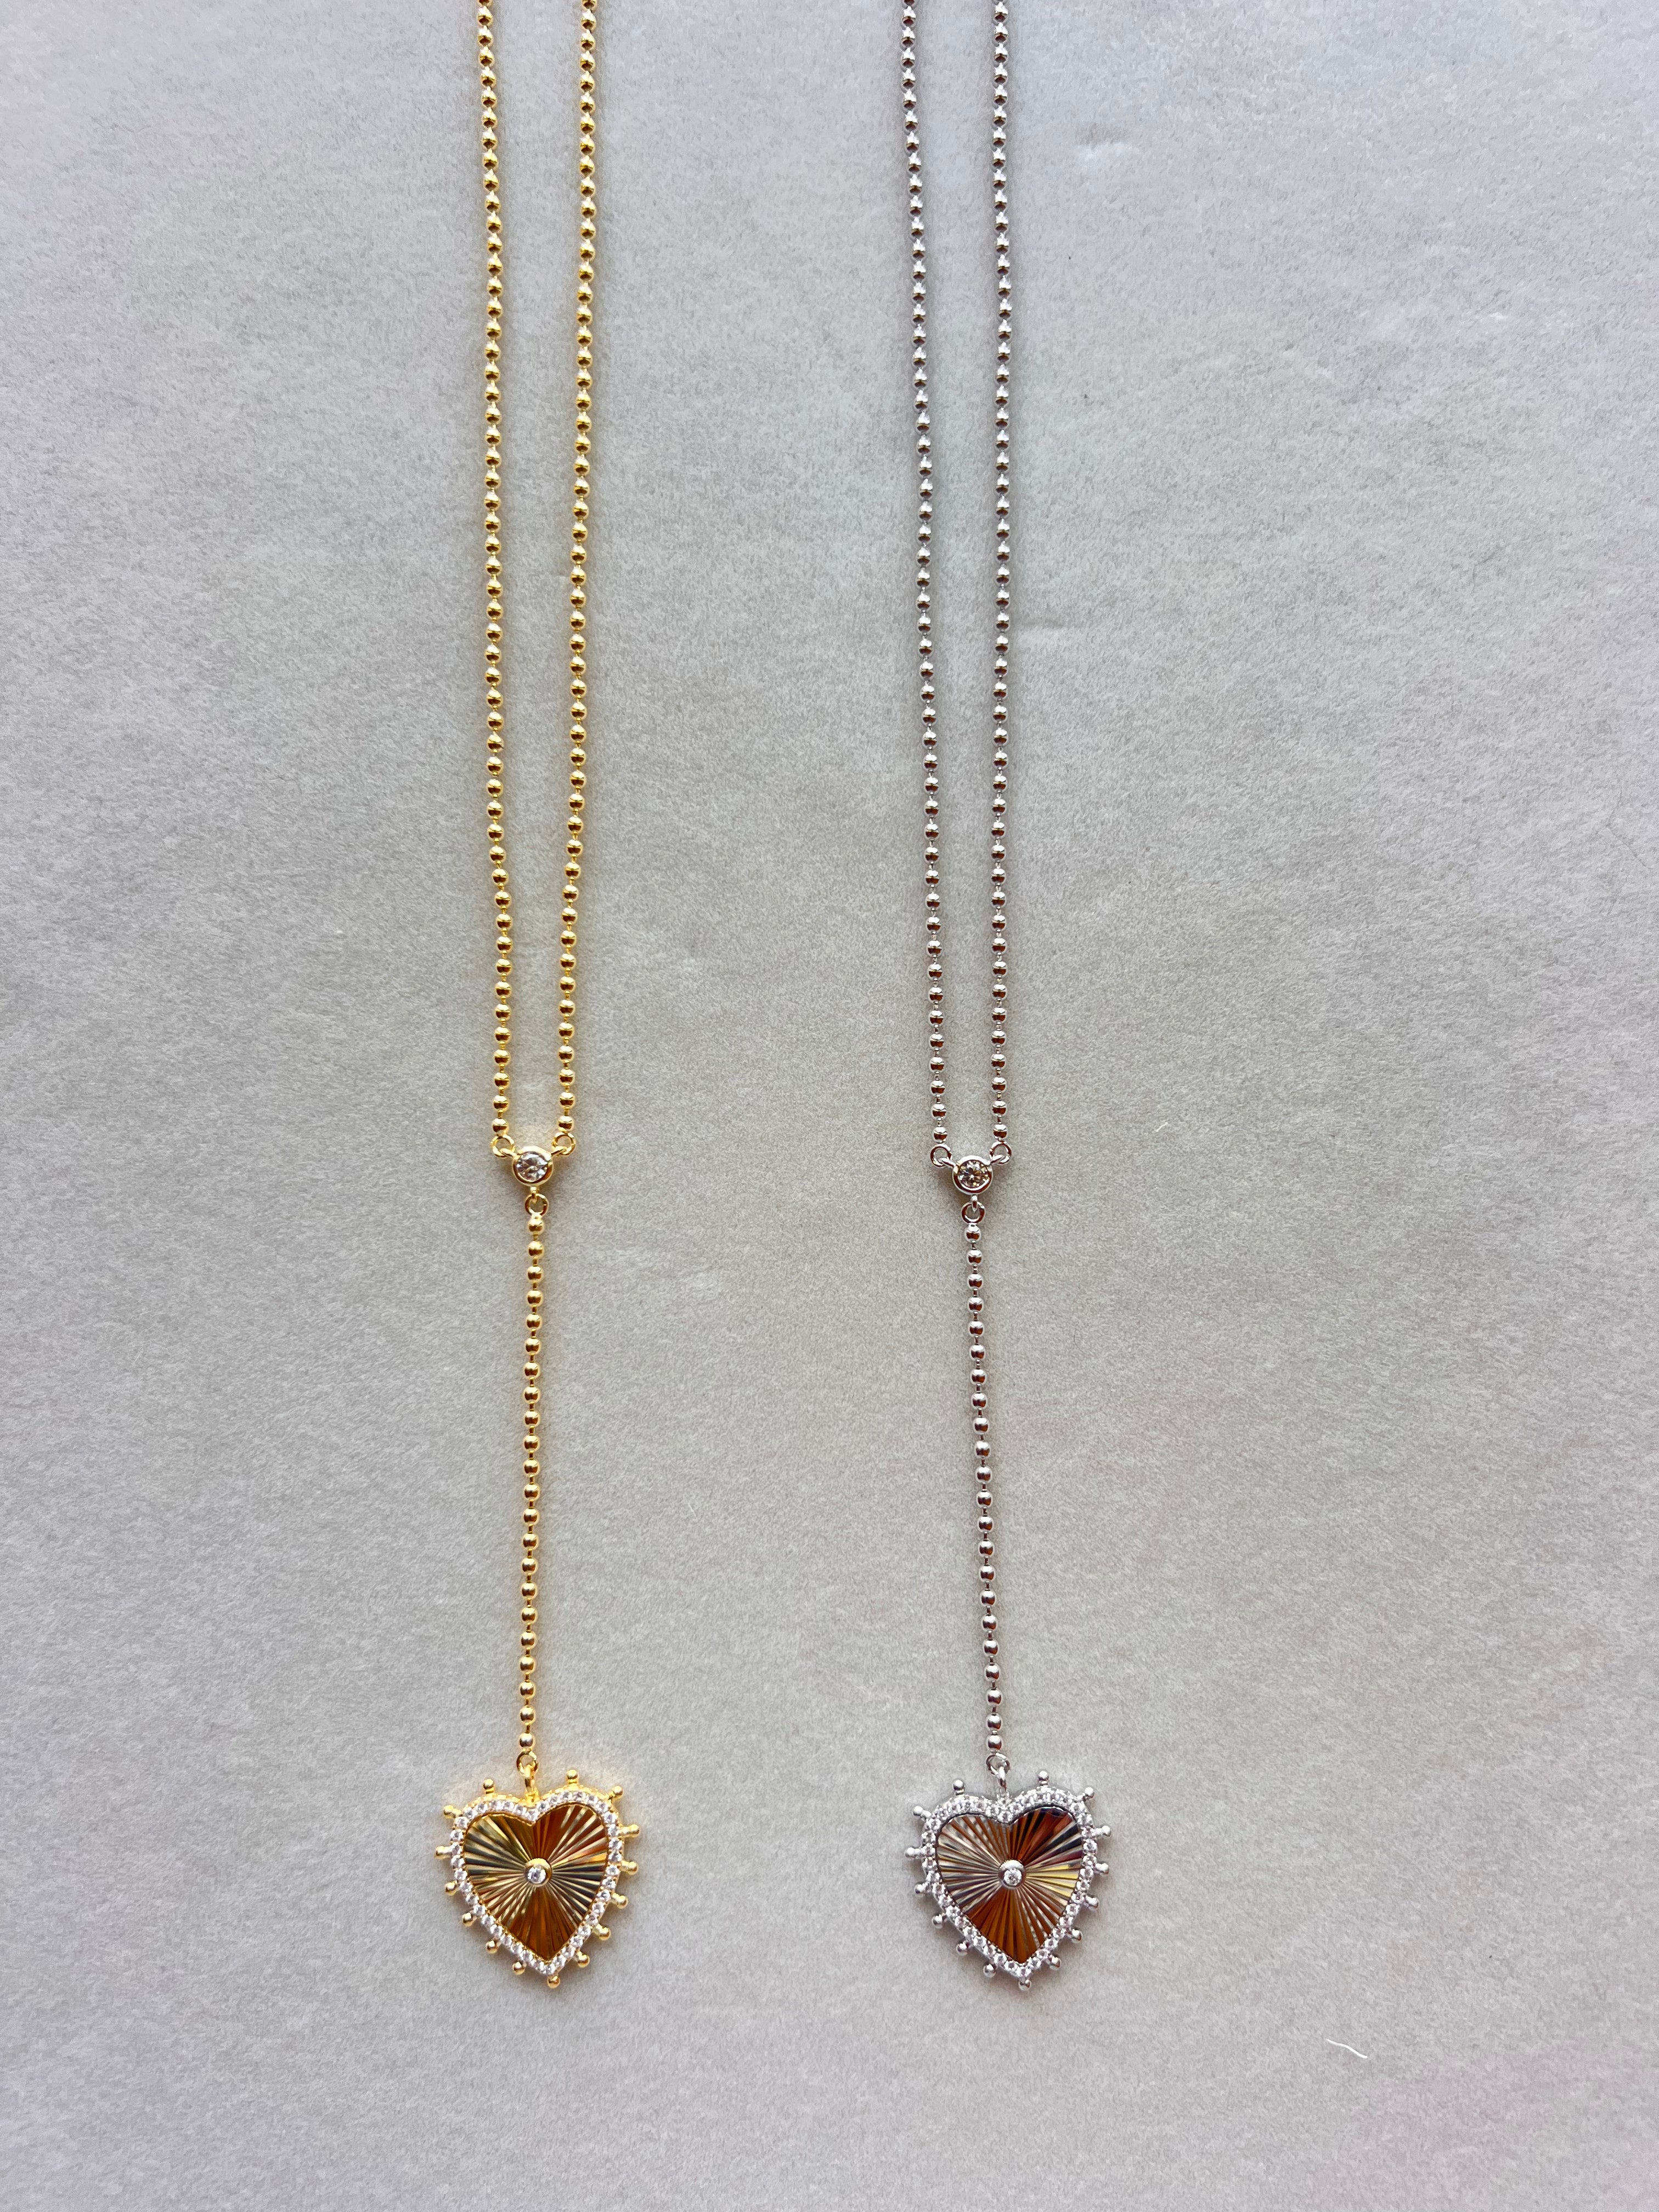 Lariat Heart Scale Ball Necklace